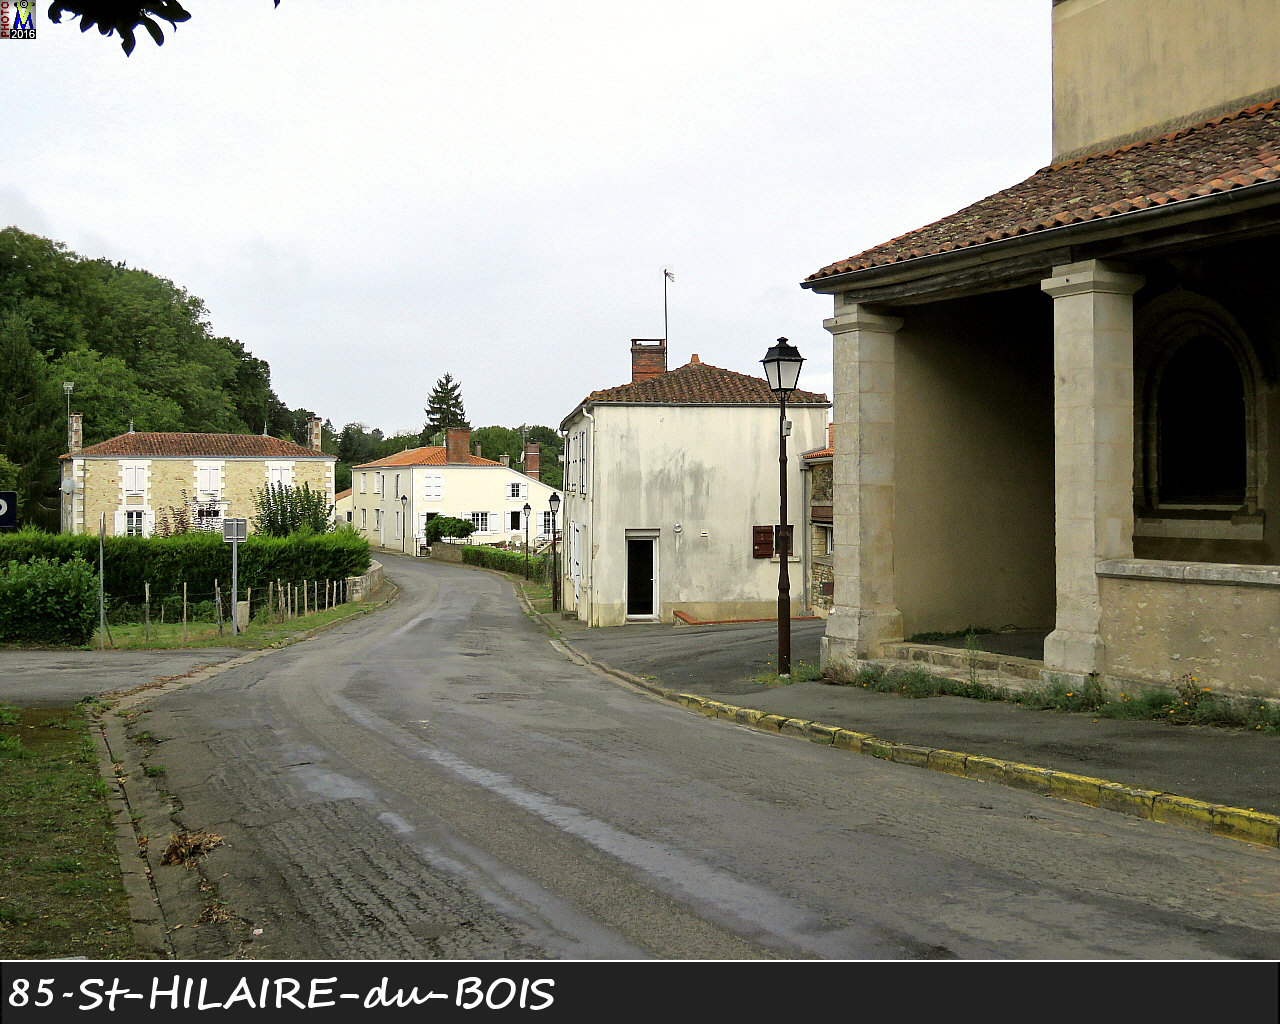 85CAILLERE-StHILAIRE-HILAIRE_100.jpg